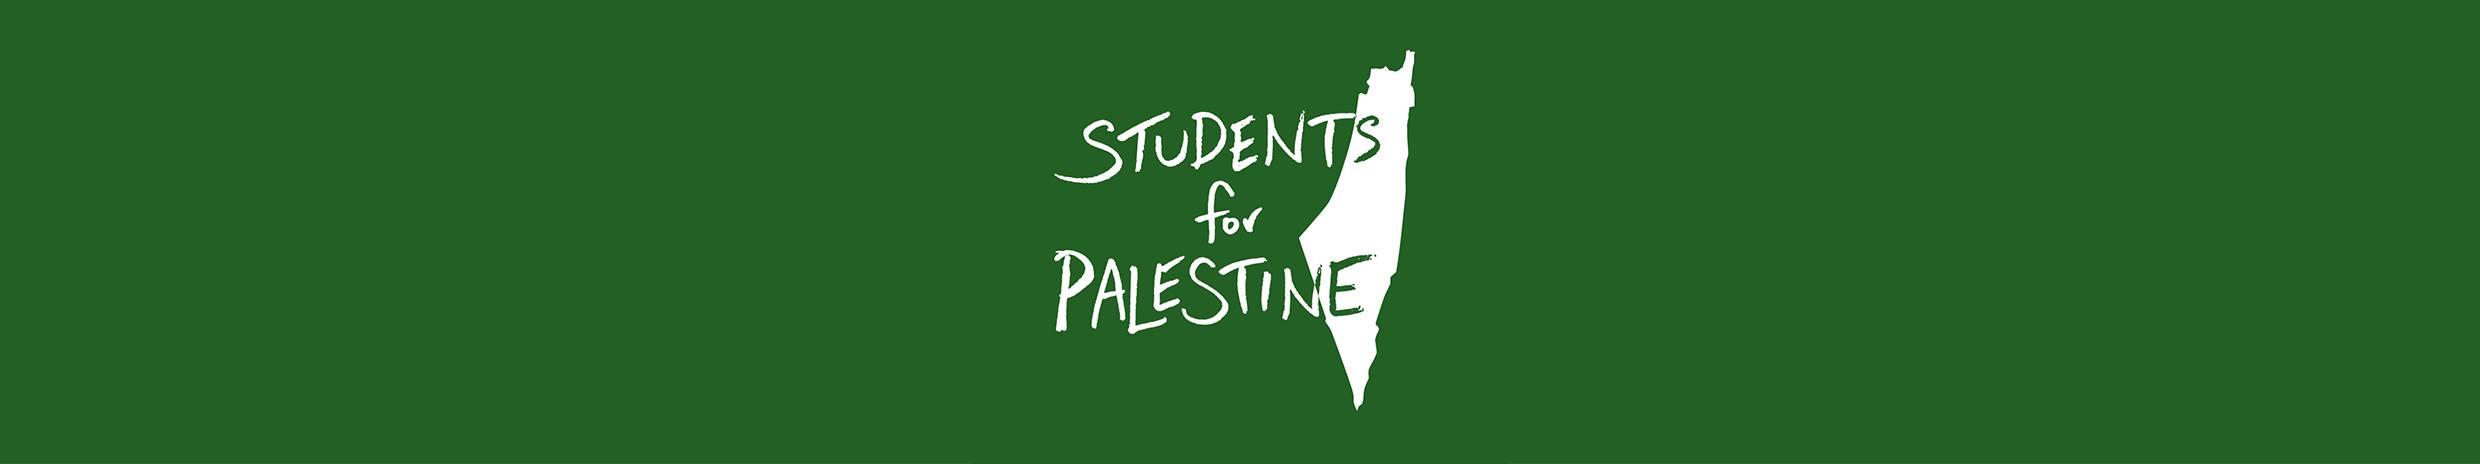 "Students for Palestine" is written in white text on a green background, alongside the outline of the Palestine region.